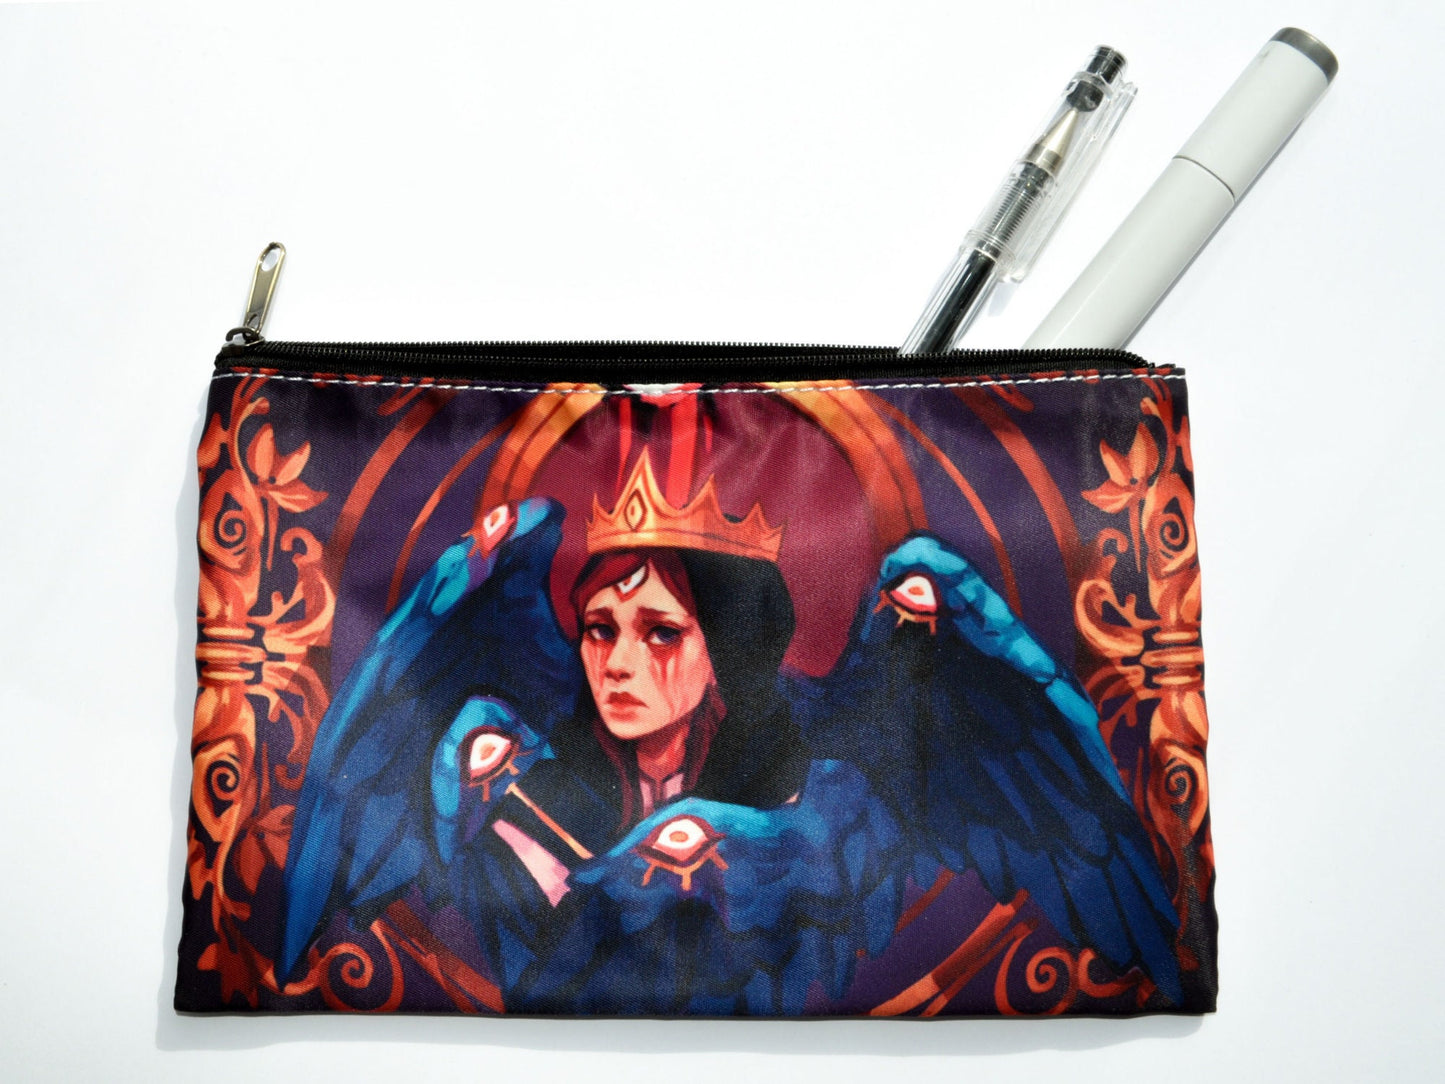 Angelic Zipper Pouch - Stationery or Cosmetic Bag - Blue